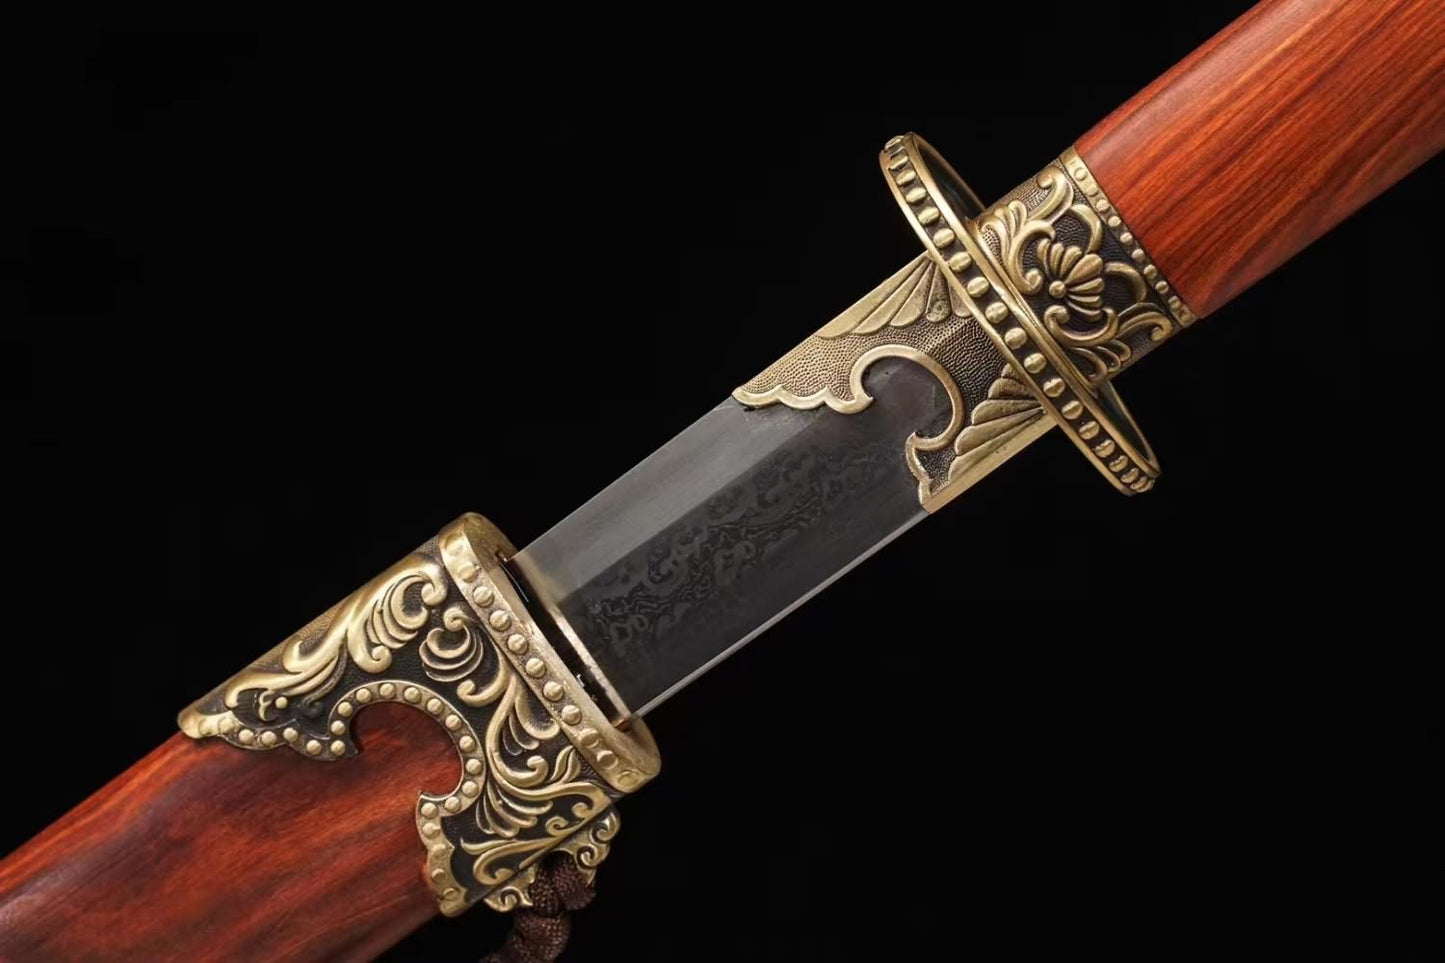 LOONGSWORD Chinese Ming Dynasty Imperial Guard Sword, Traditional Hand-Forged Damascus Steel Blade, Exquisite Brass Fittings, and Solid Acid Branchwood Scabbard - 41 Inches